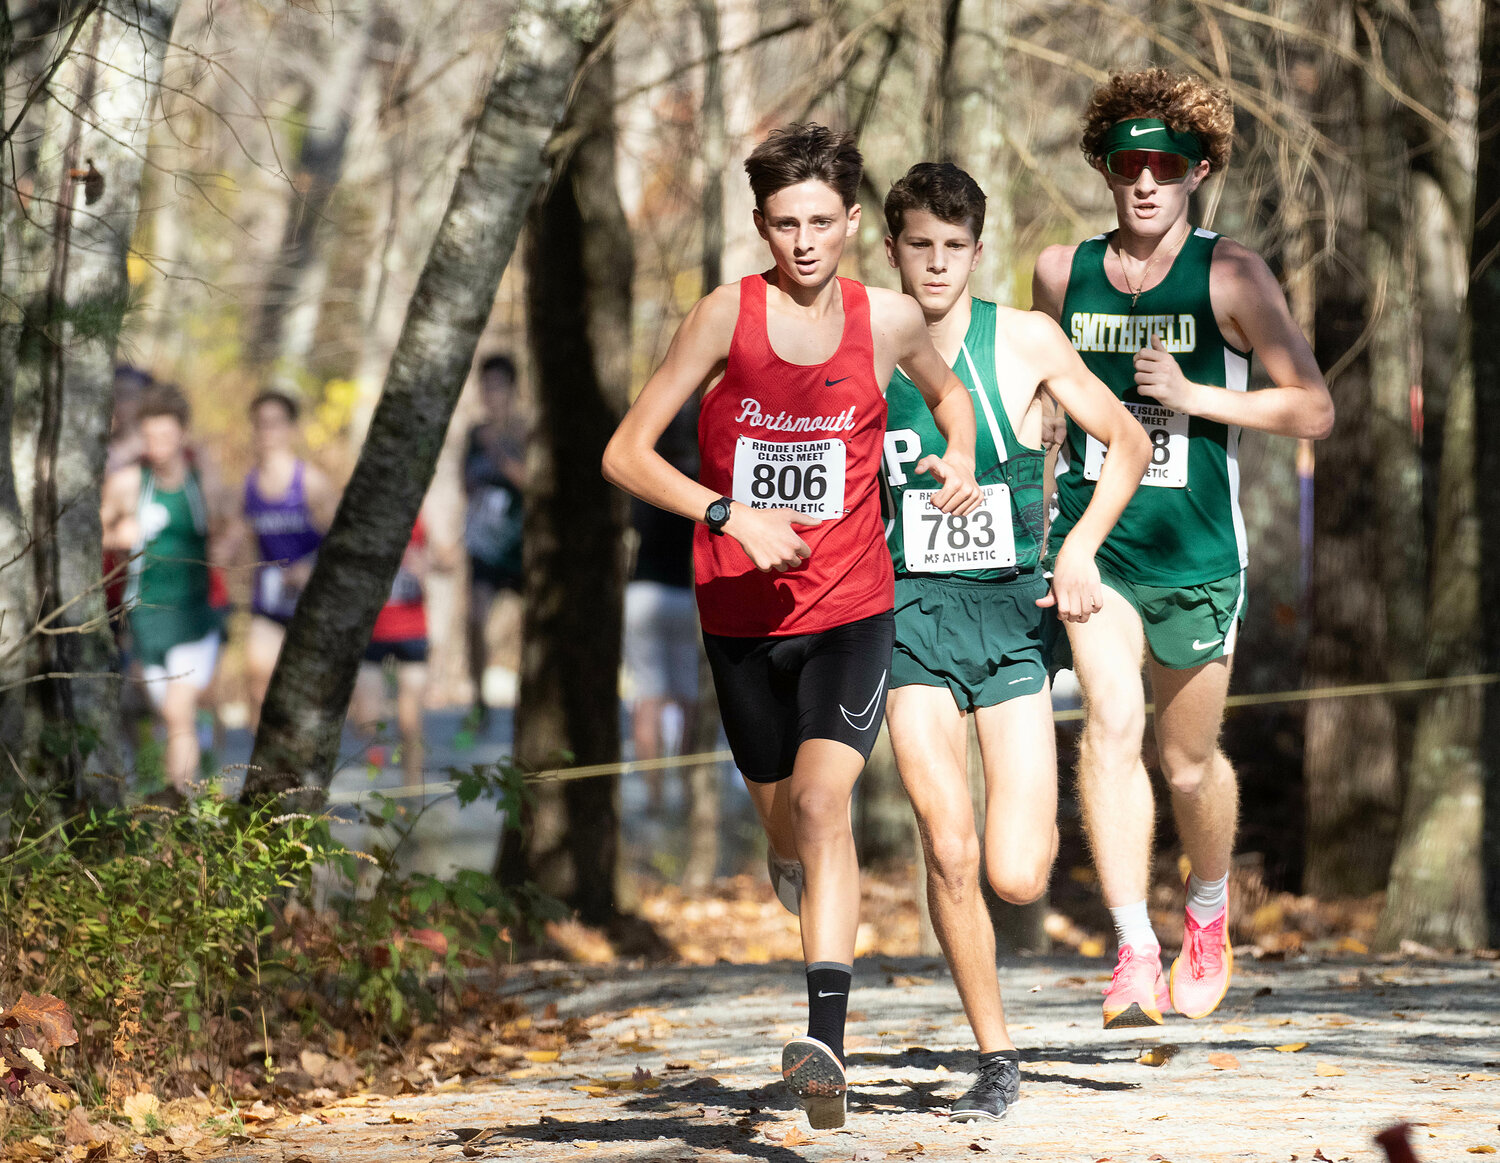 Portsmouth High’s Sean Gray came in second place among the boys in the Class B Cross-Country Championship at Ponaganset High School on Saturday. He ran the five-kilometer course in a time of 16:23.54 and was the youngest competitor to finish in the top 15.